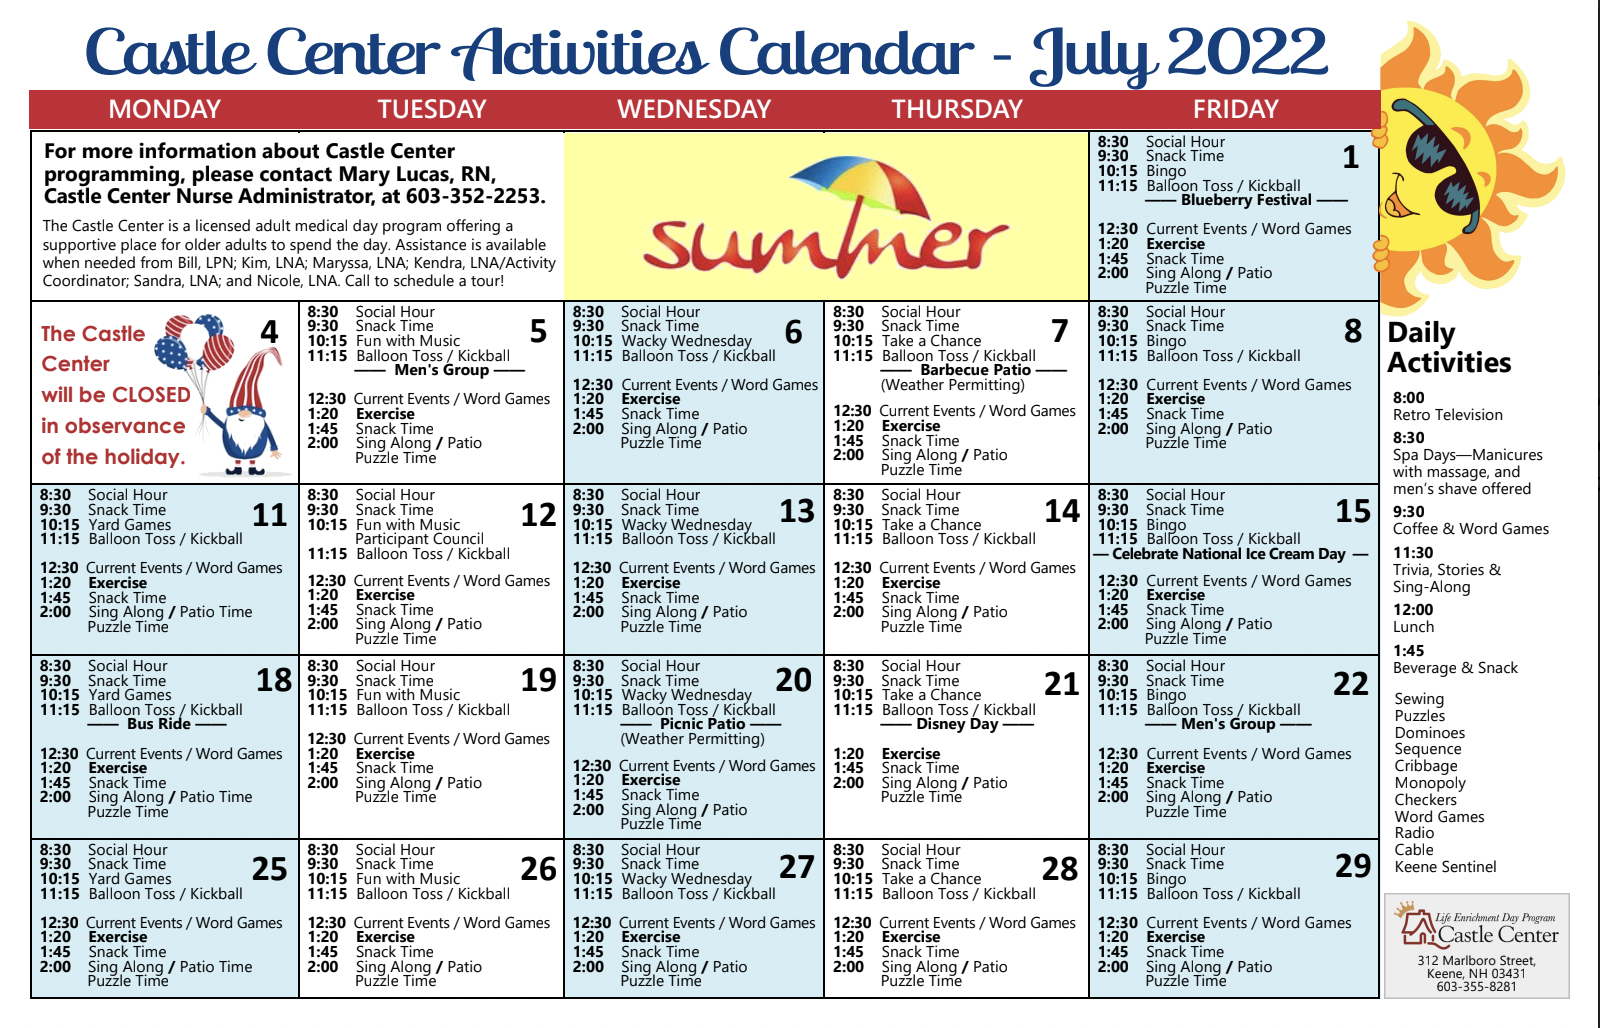 Castle Center Activities for July 2022